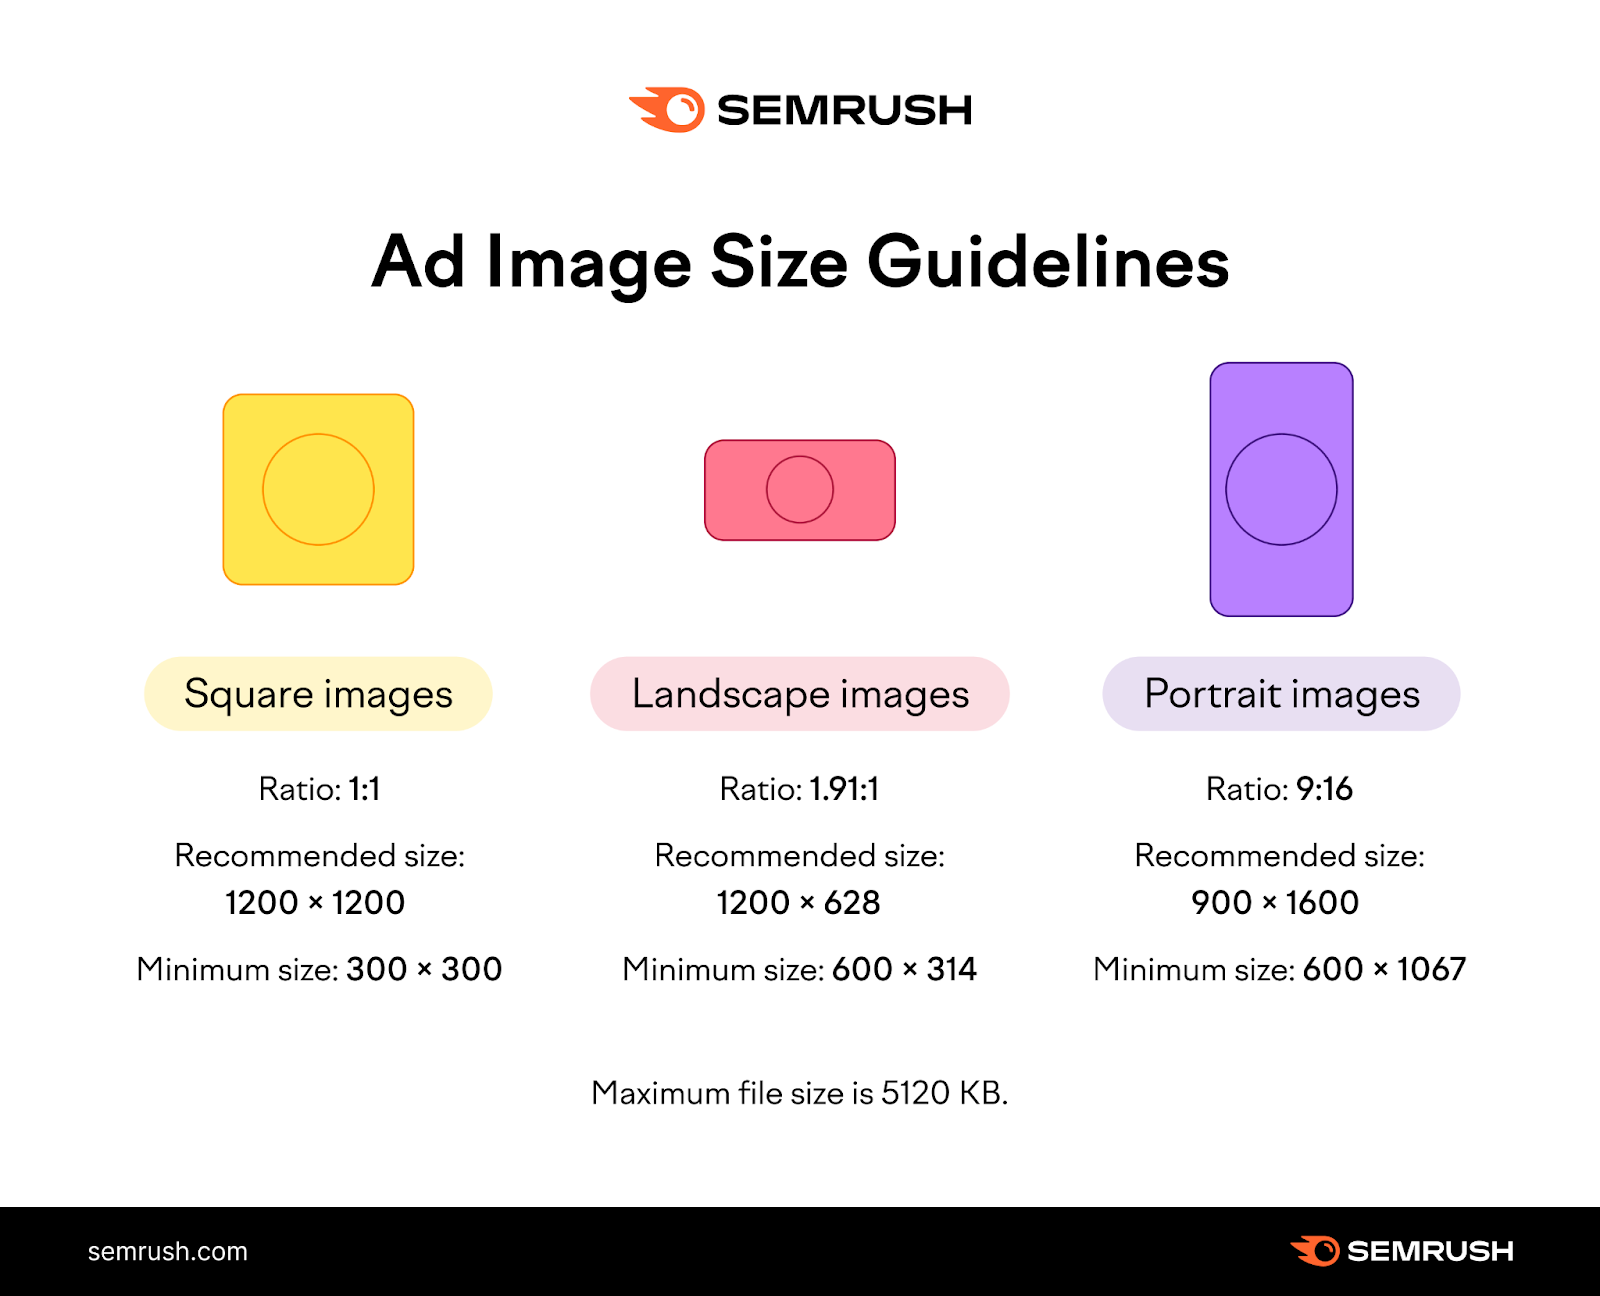 Ad image size guidelines